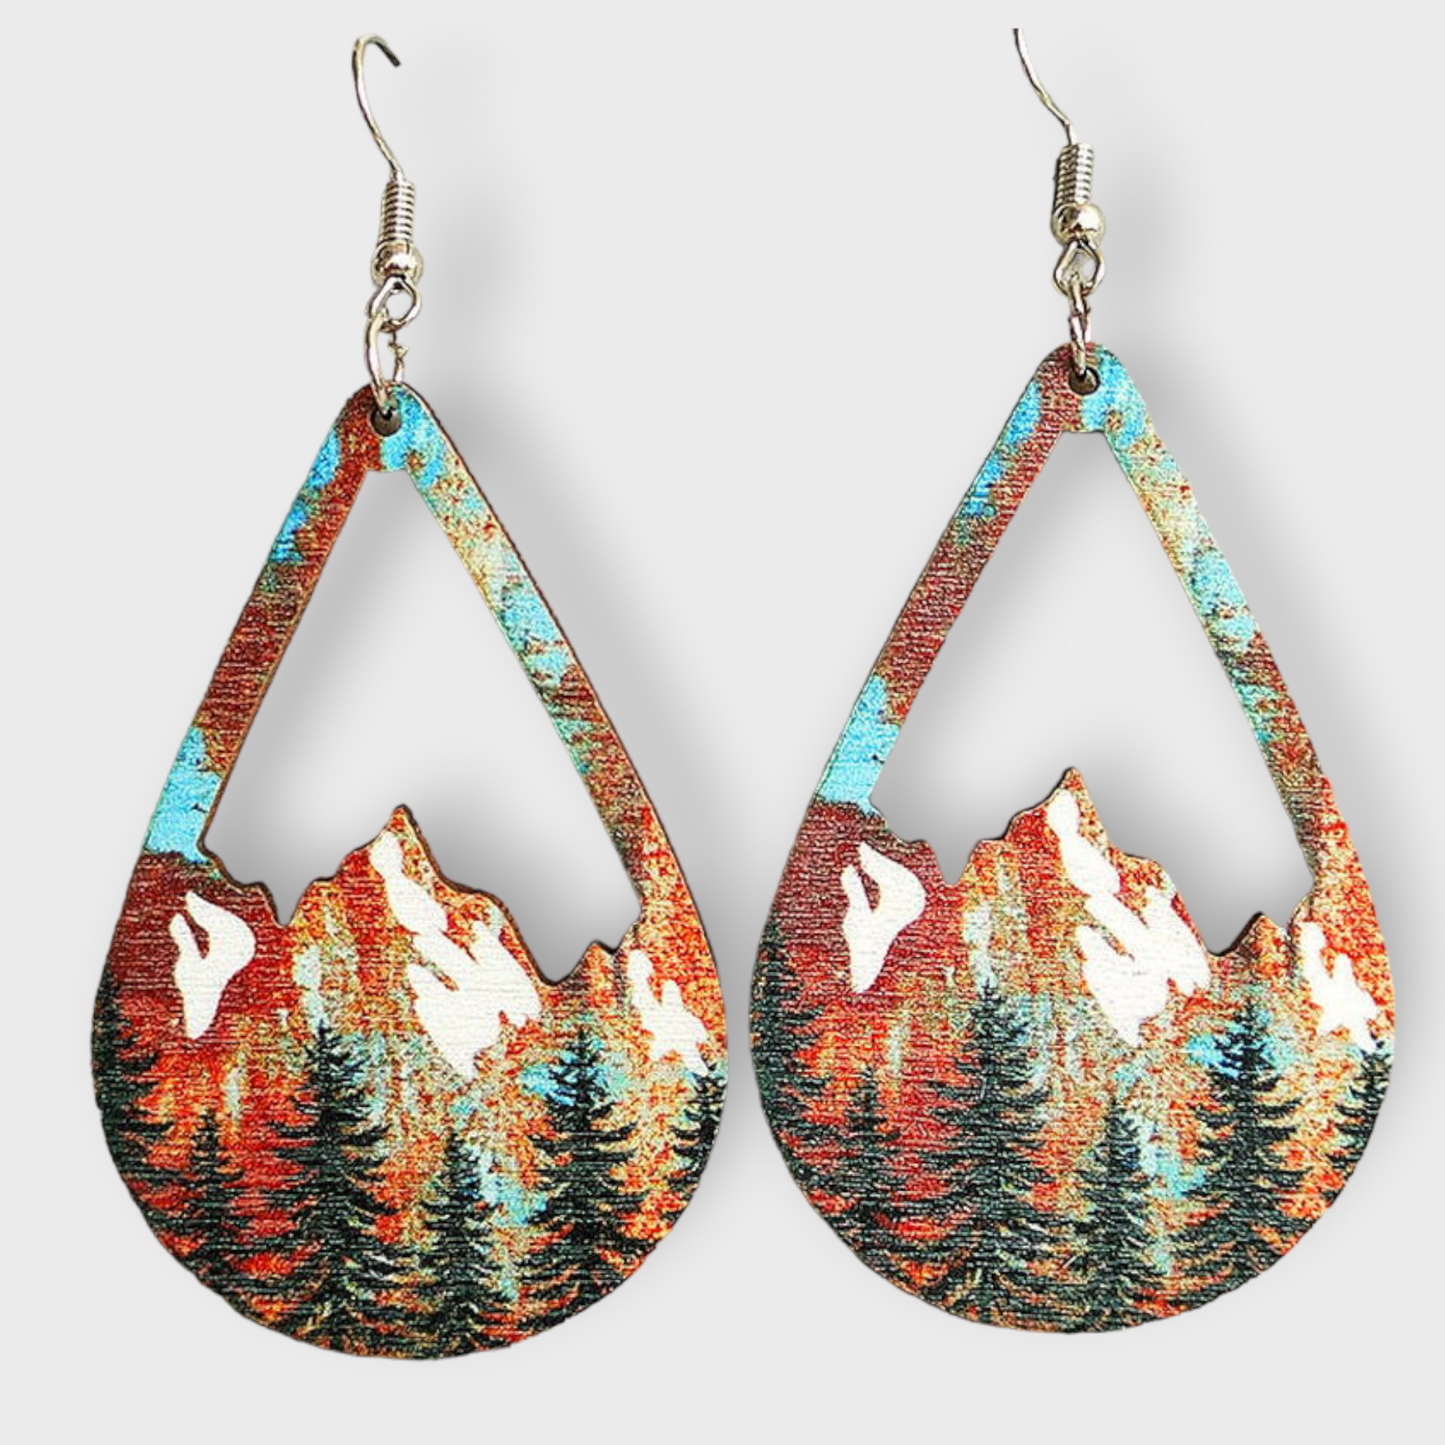 Snow Mountain and Forest Wood Teardrop Earrings